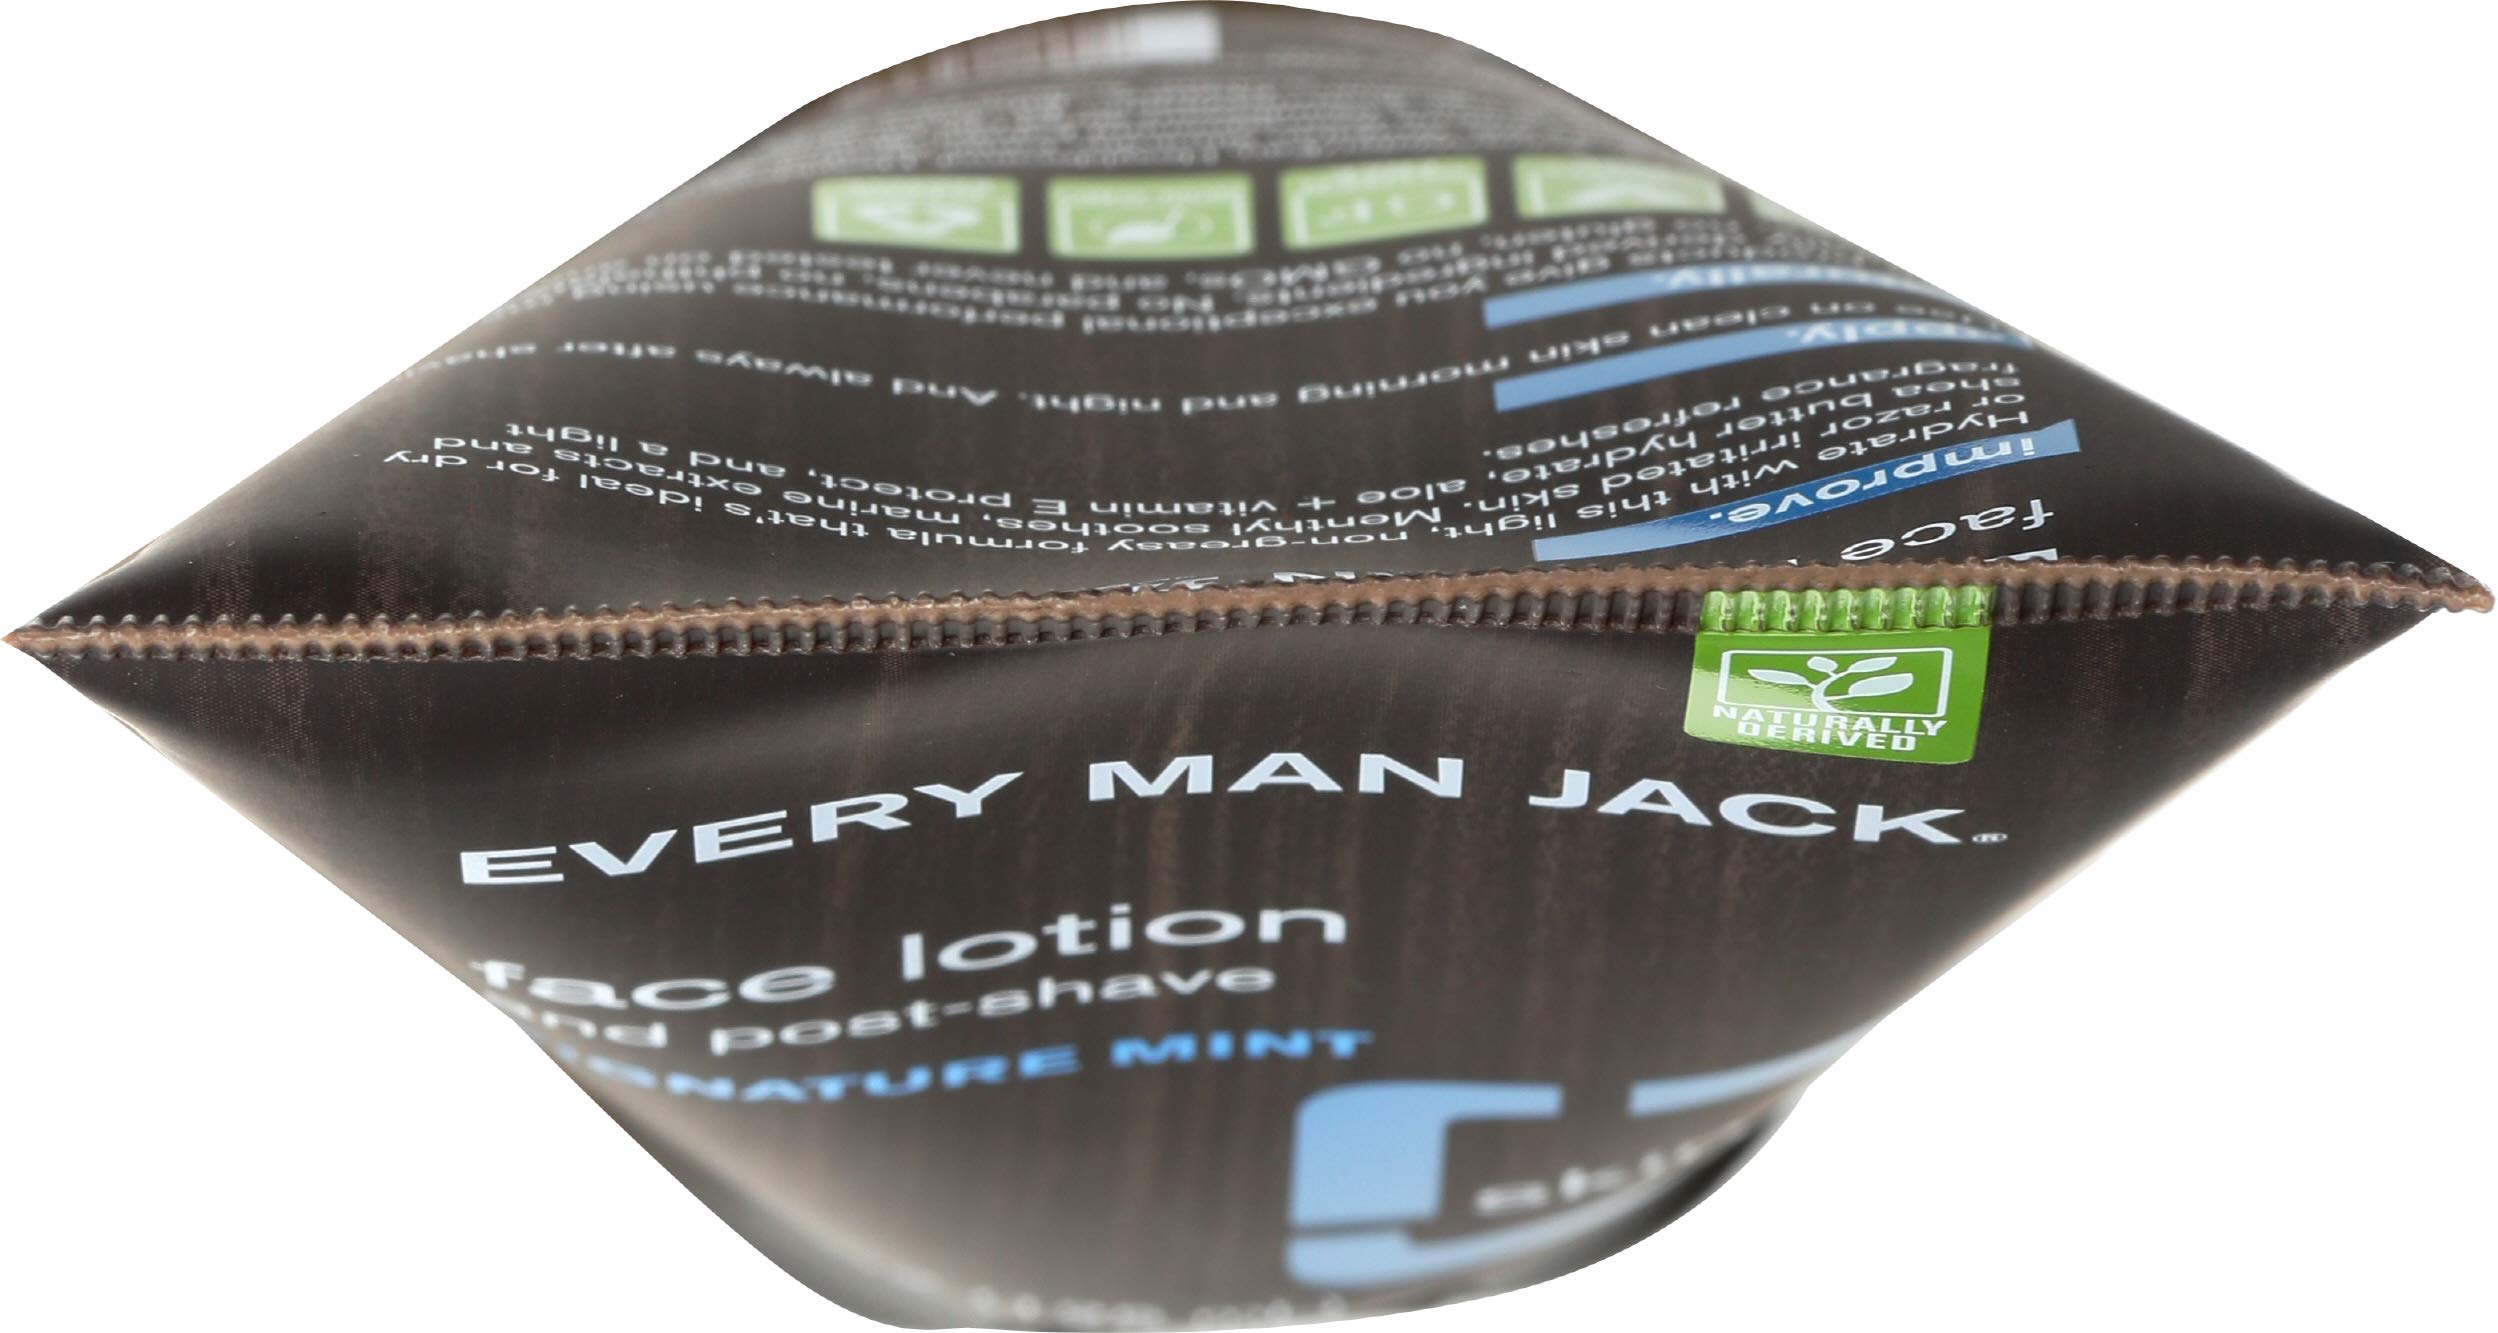 Every Man Jack - Face Lotion and Post-Shave Signature Mint - 4.2 fl. oz.